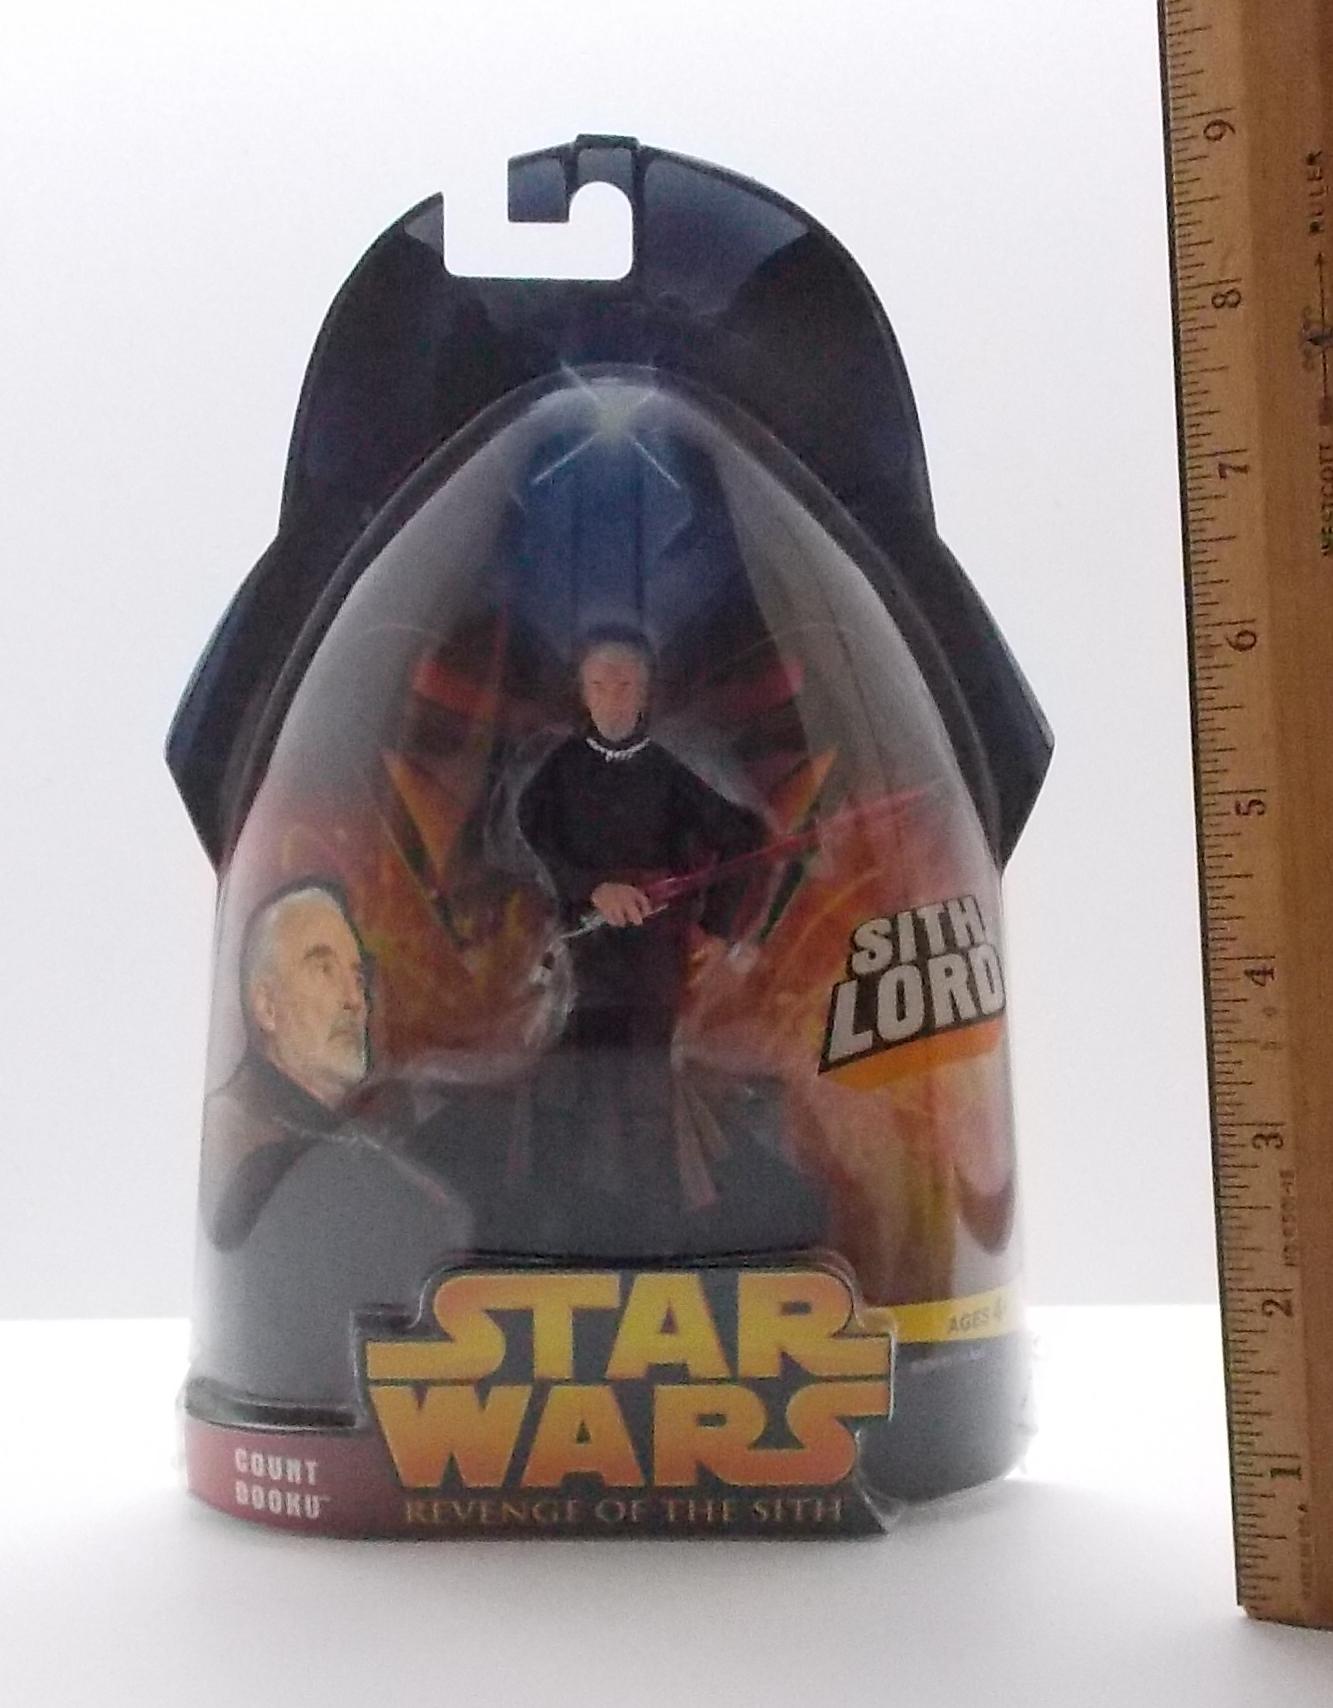 Count Dooku 13 Revenge of the Sith  Star Wars Action Figure